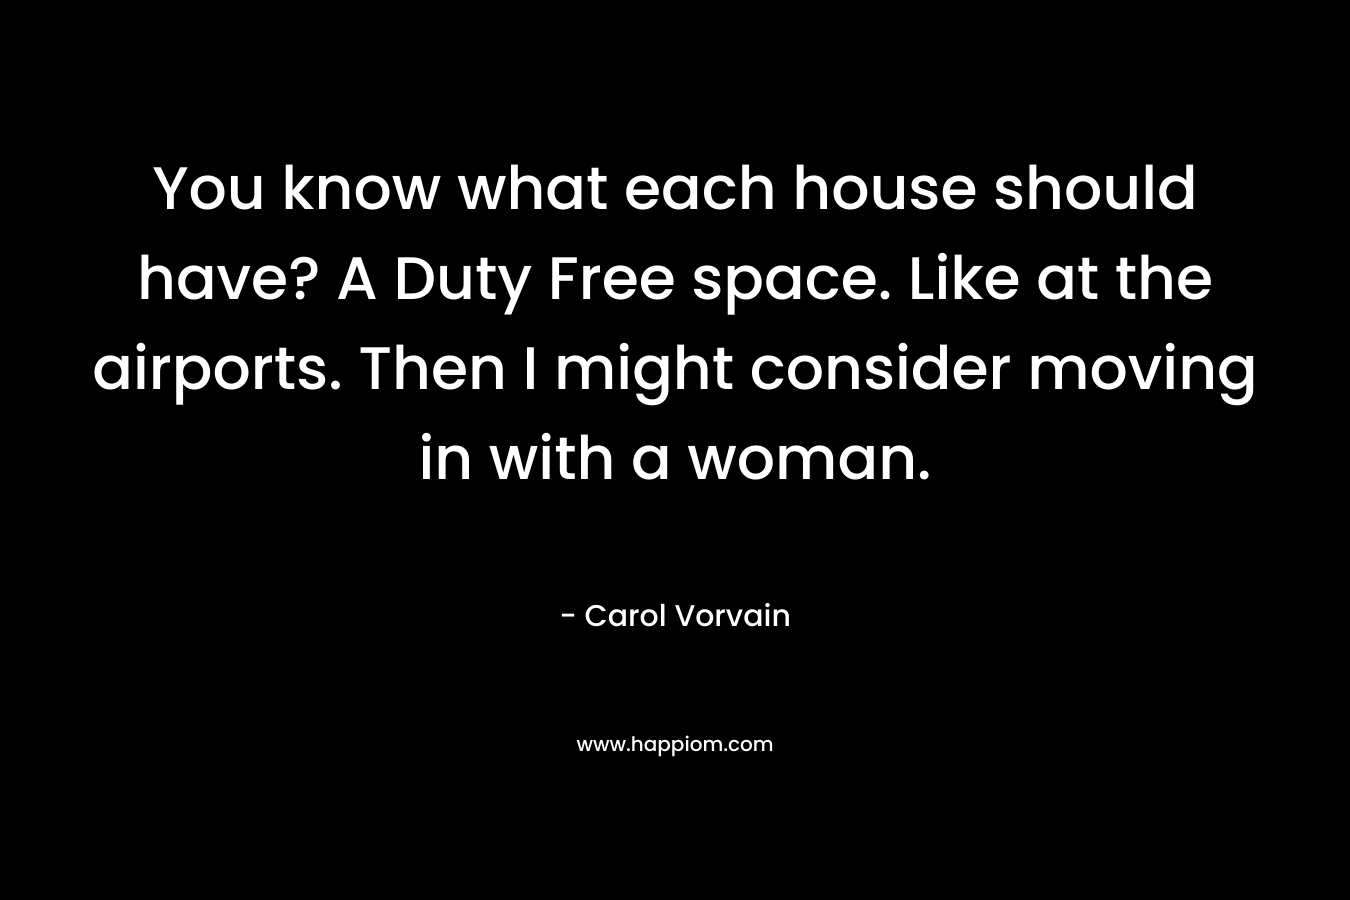 You know what each house should have? A Duty Free space. Like at the airports. Then I might consider moving in with a woman.